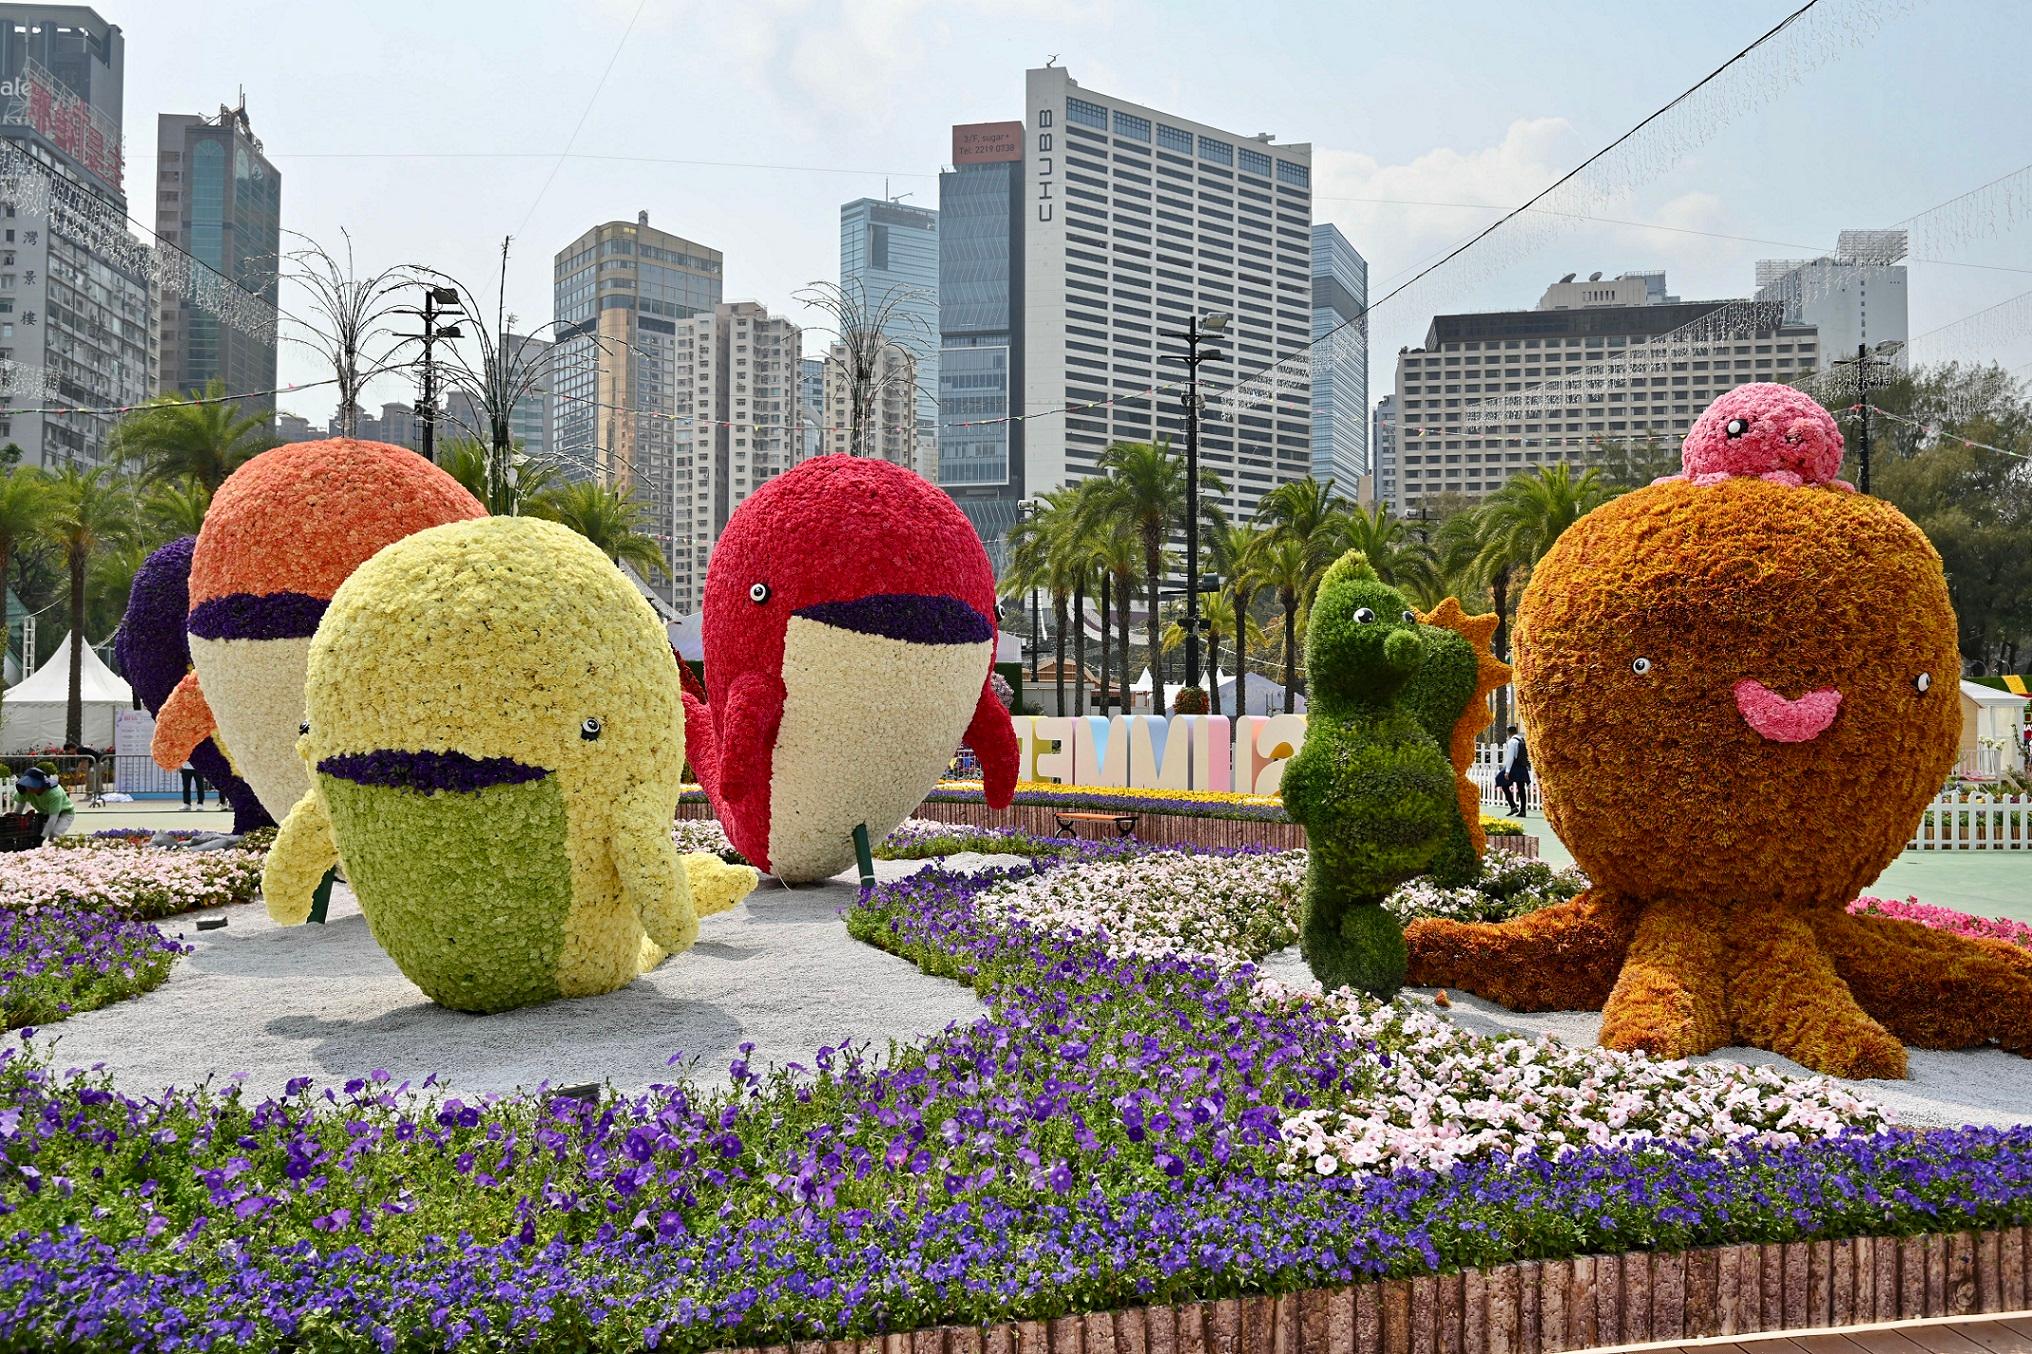 The Hong Kong Flower Show 2023 will be held at Victoria Park from tomorrow (March 10) until March 19. This year's flower show features "Bliss in Bloom" as the main theme and hydrangea as the theme flower. Large-scale flower plots along the axis of the showground are decorated on the theme of four seasons with vibrant hydrangeas and installations in seasonal colours. Photo shows the floral display themed on summer.